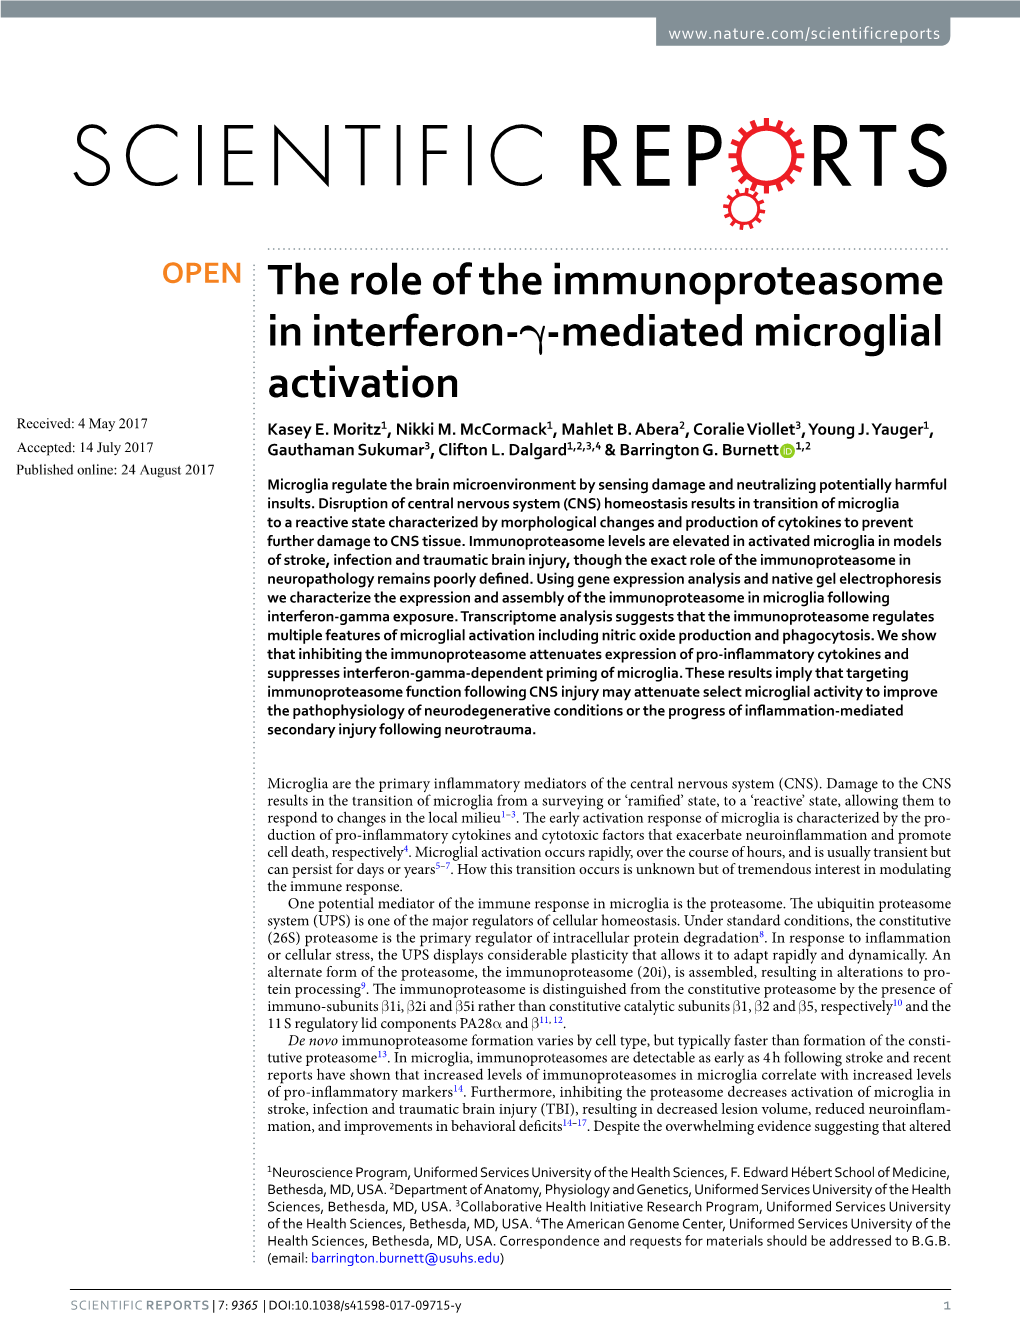 The Role of the Immunoproteasome in Interferon-Γ-Mediated Microglial Activation Received: 4 May 2017 Kasey E